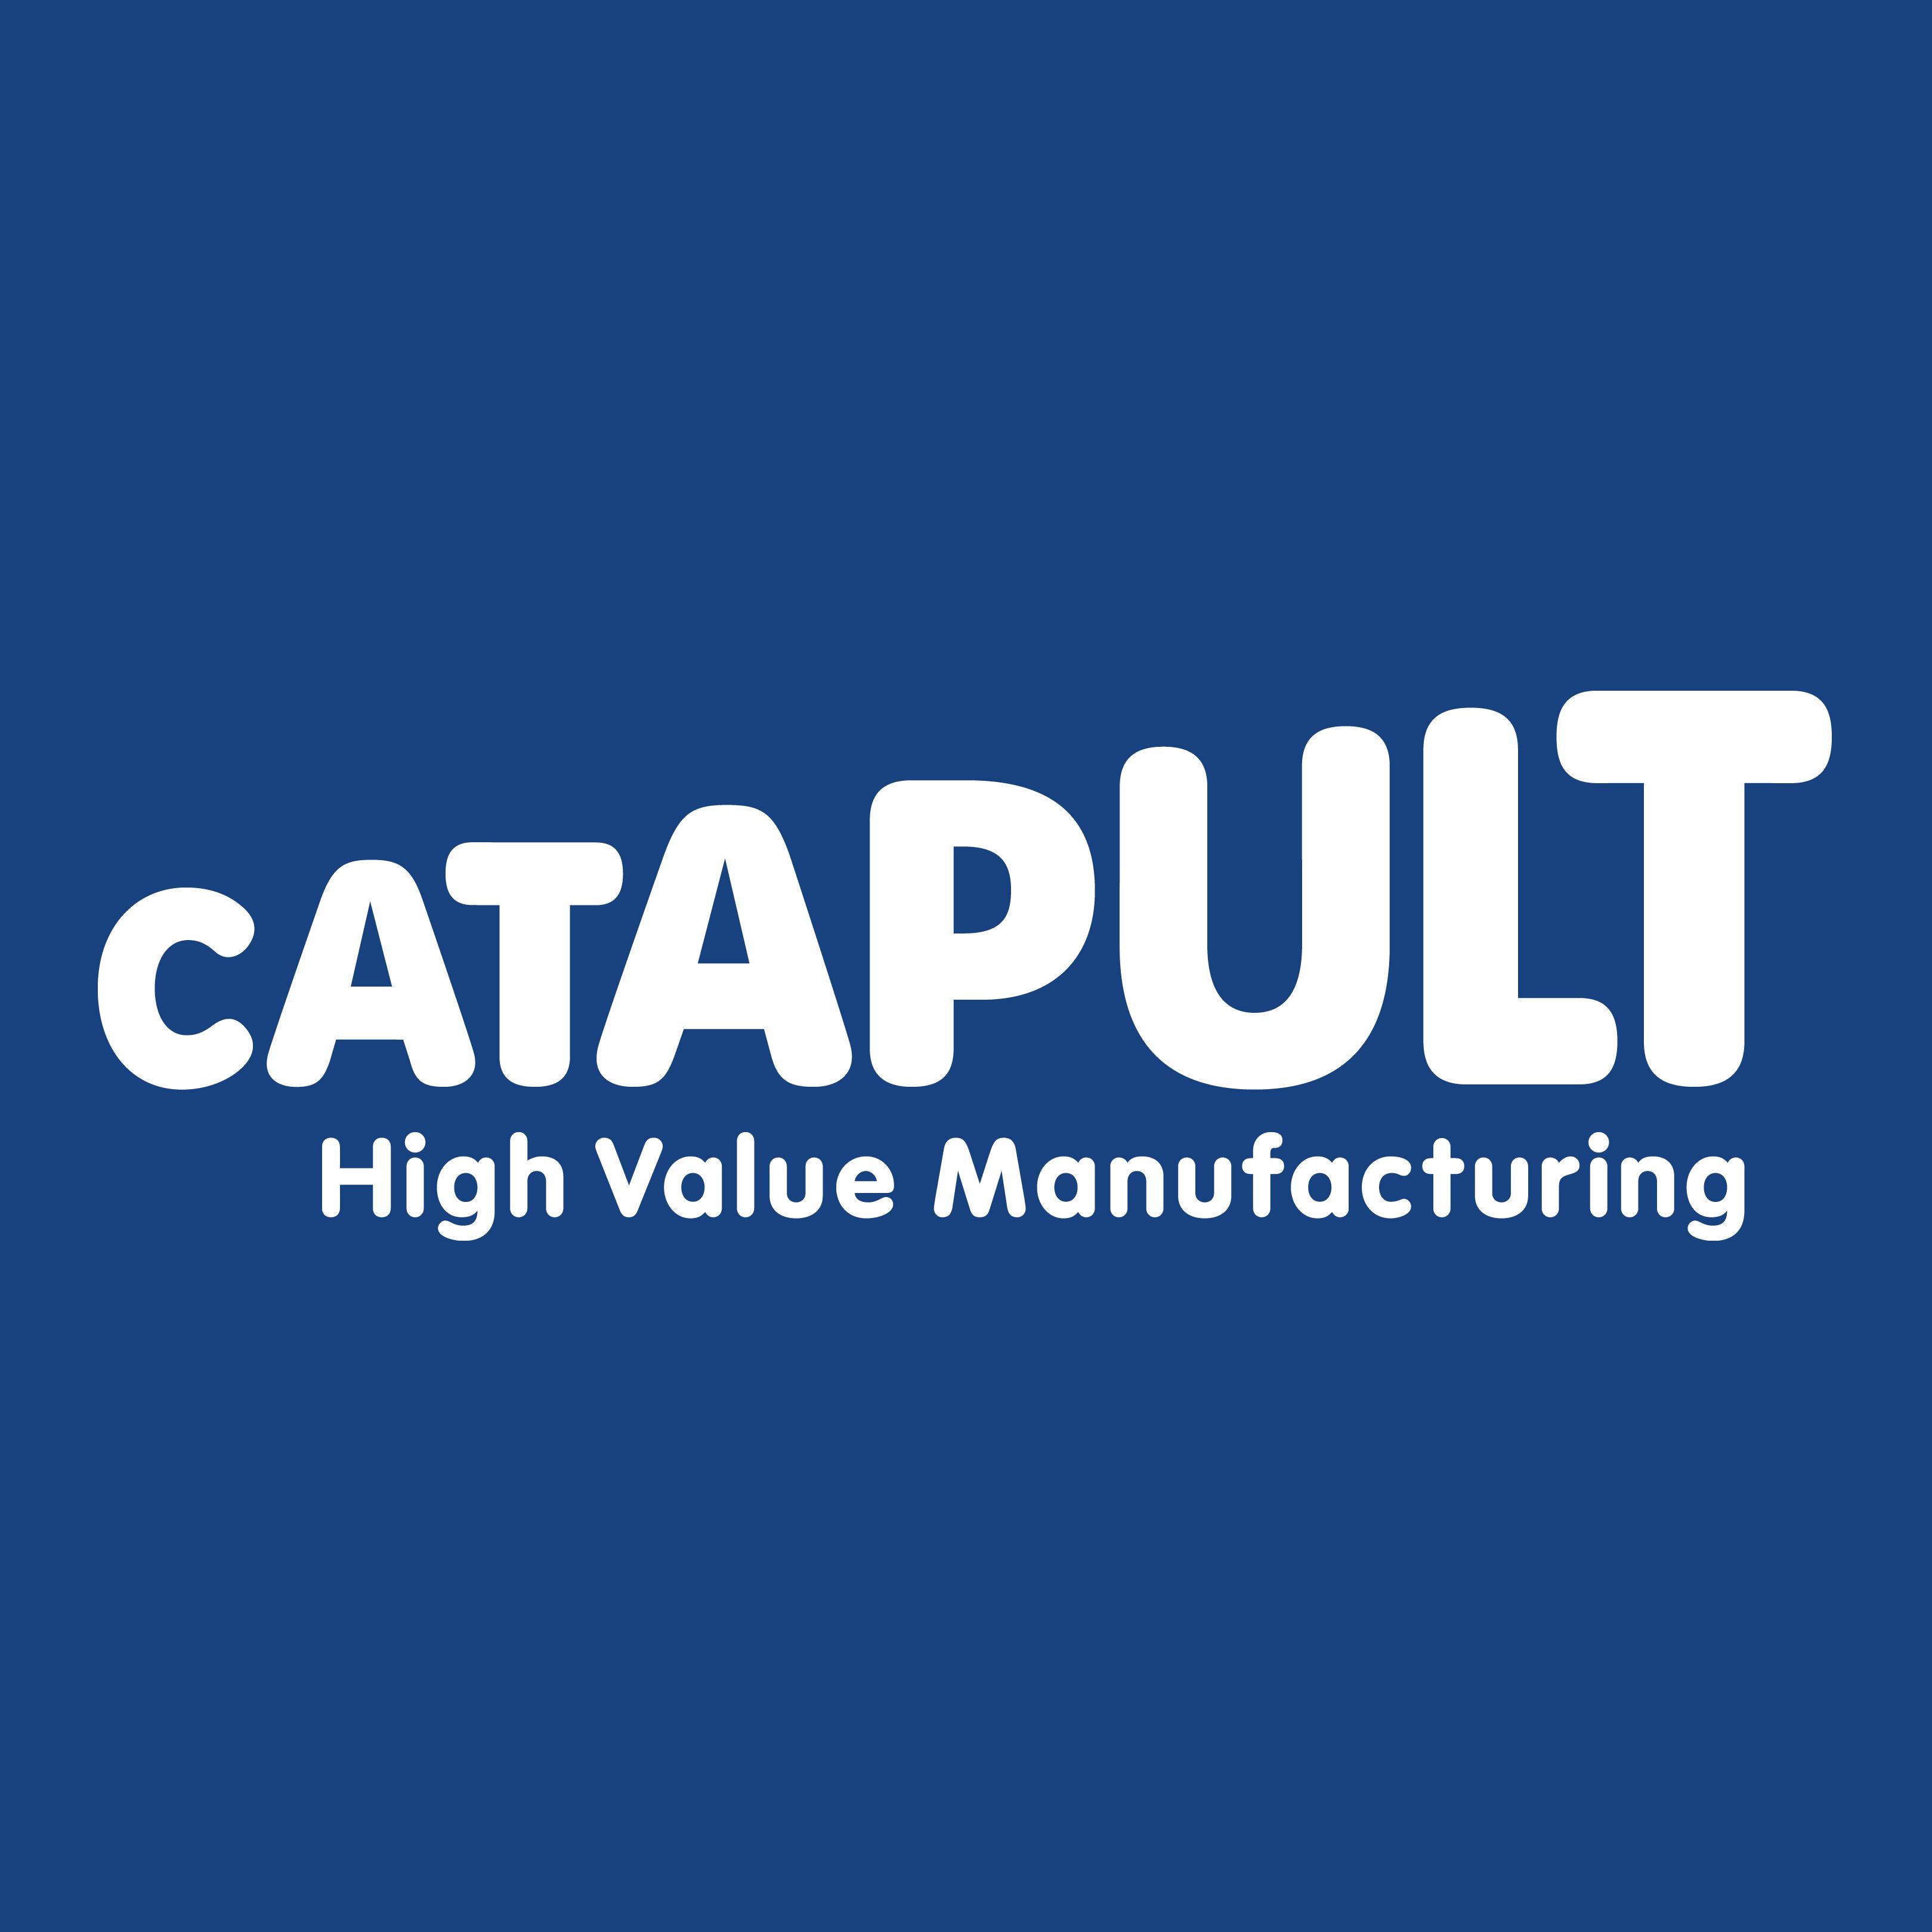 High Value Manufacturing Catapult